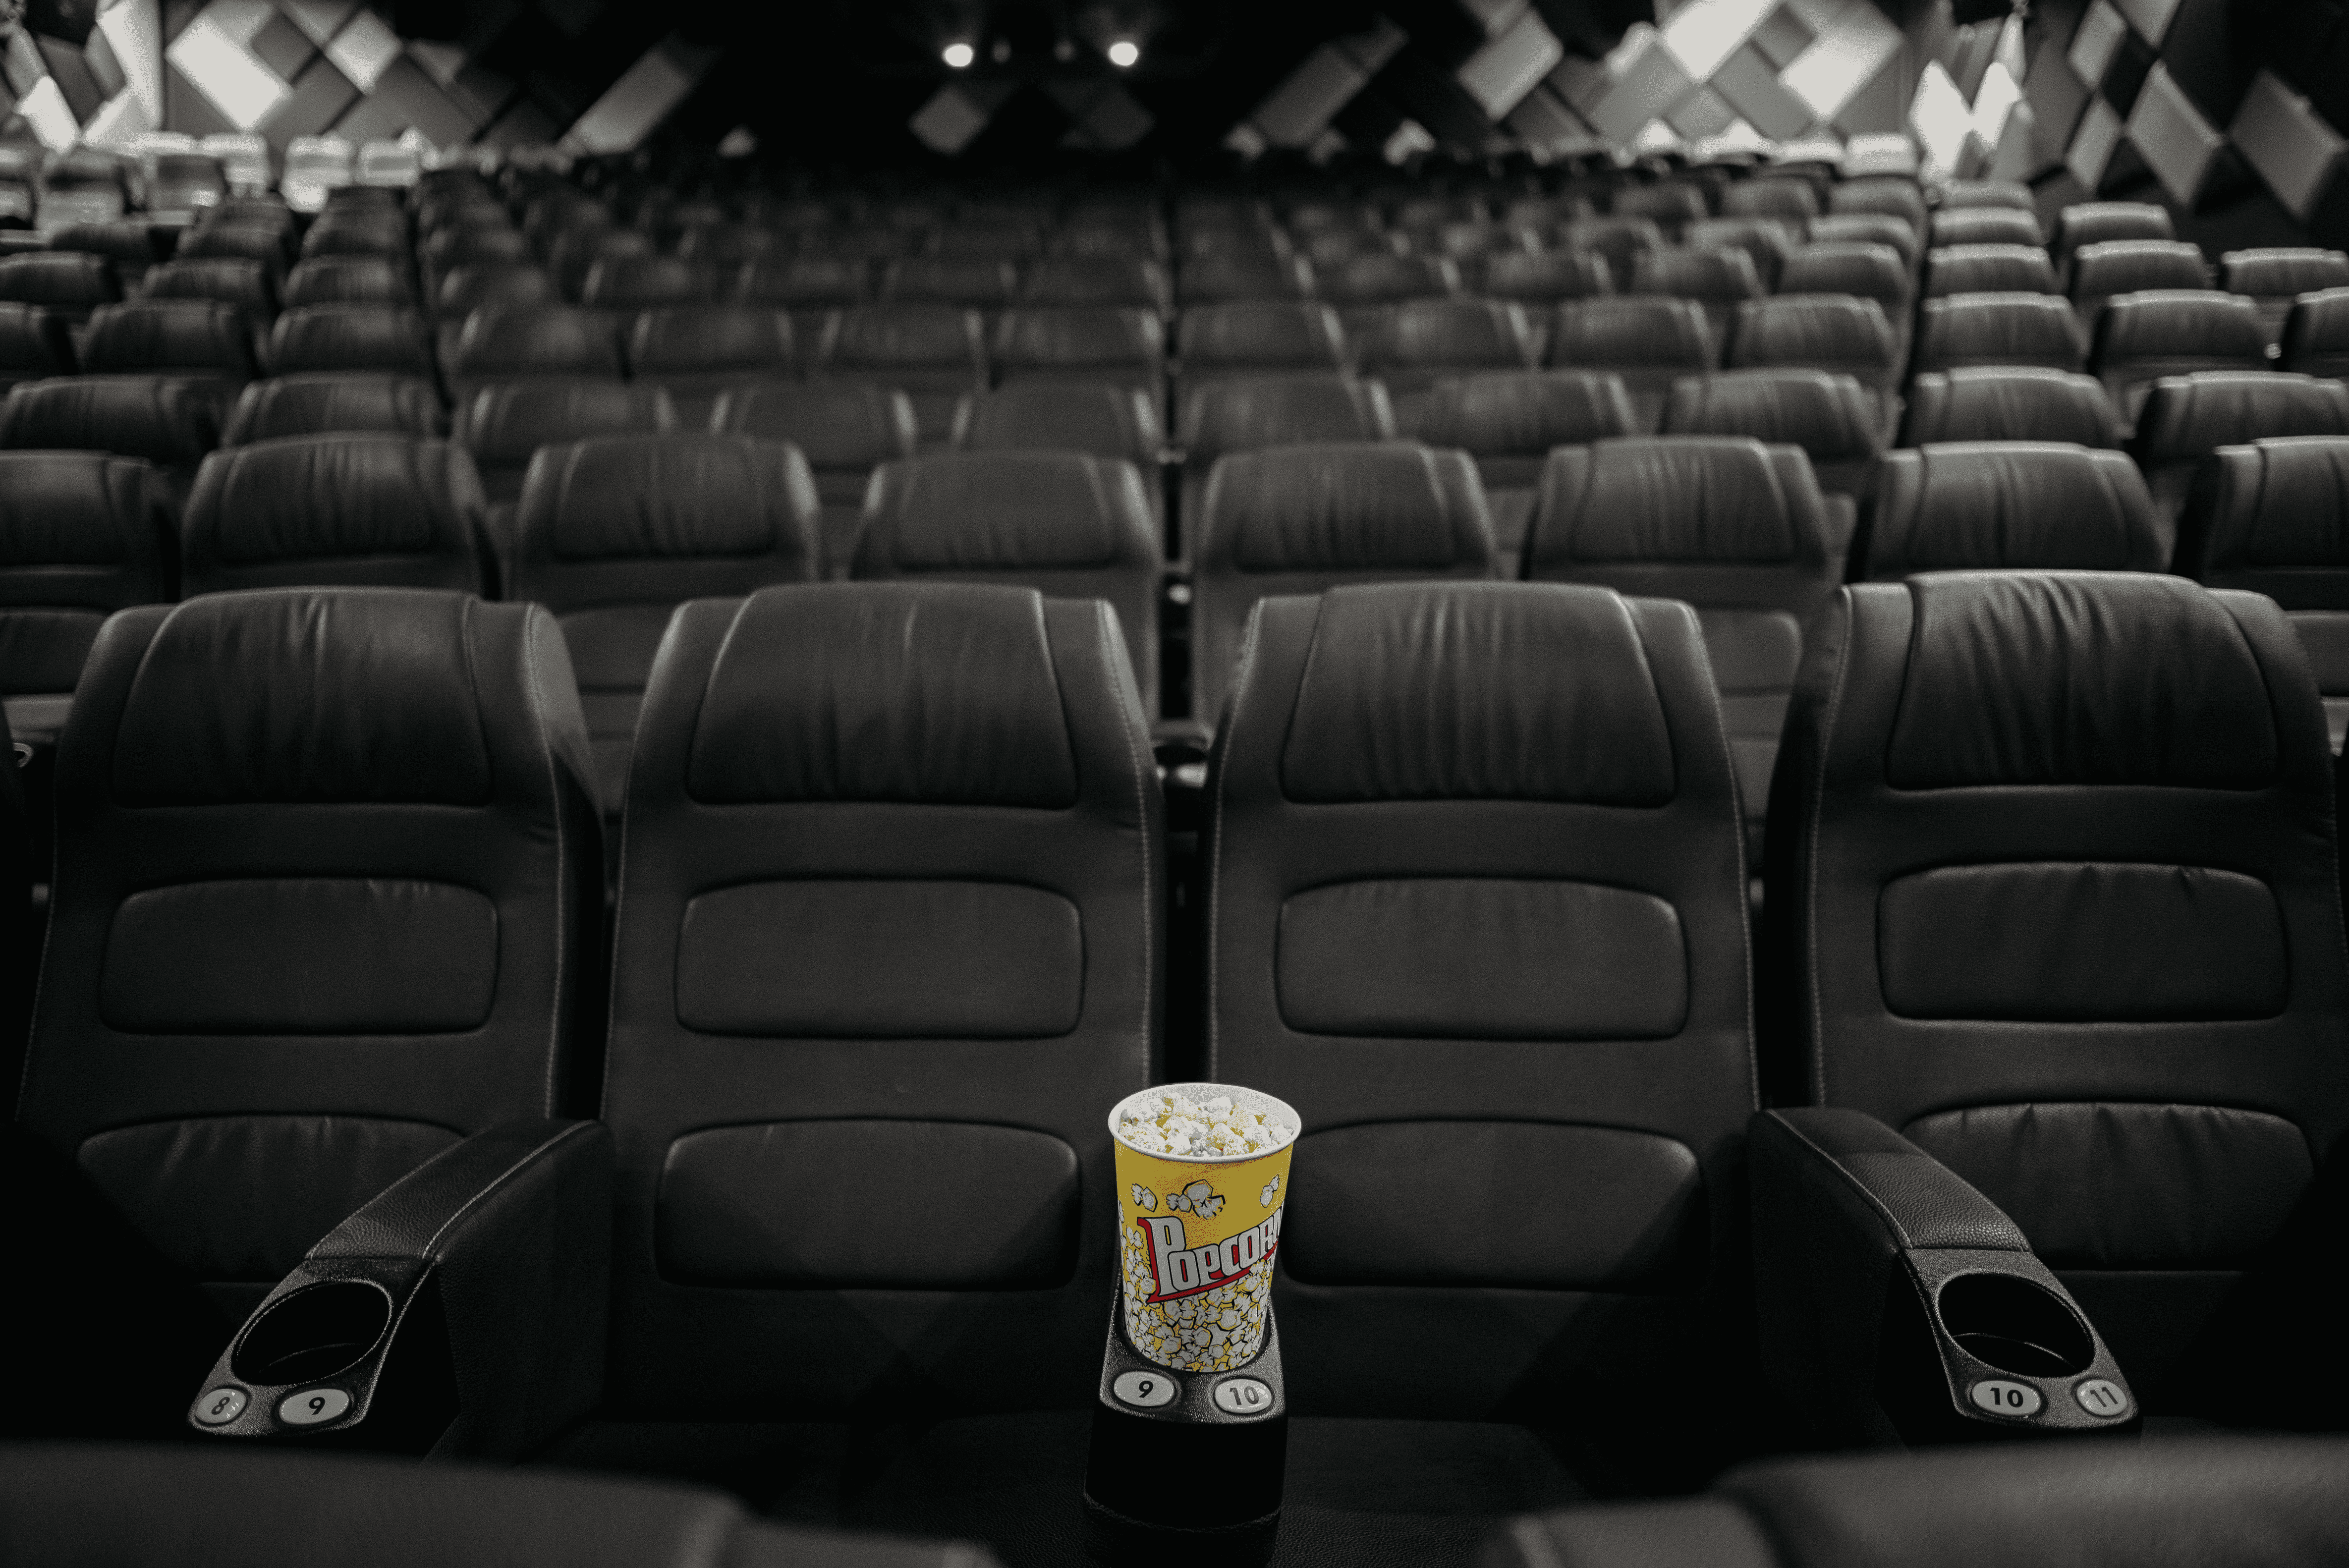 an image showing cinema seats and popcorn